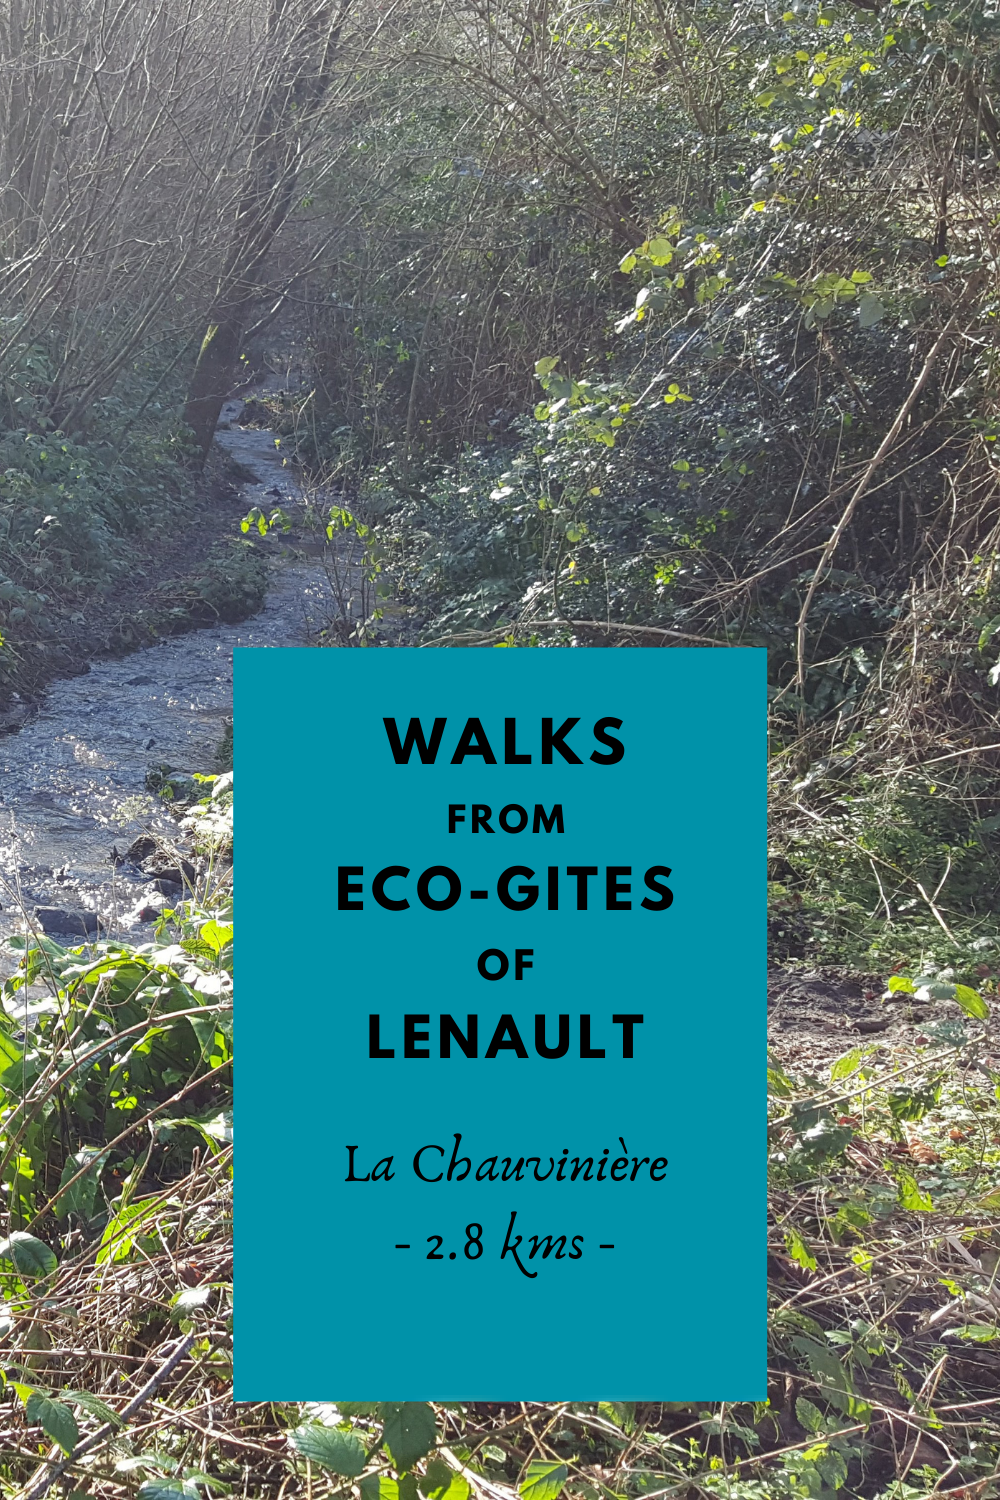 Route of 2.8 kms walk from Eco-Gites of Lénault, Normandy,France